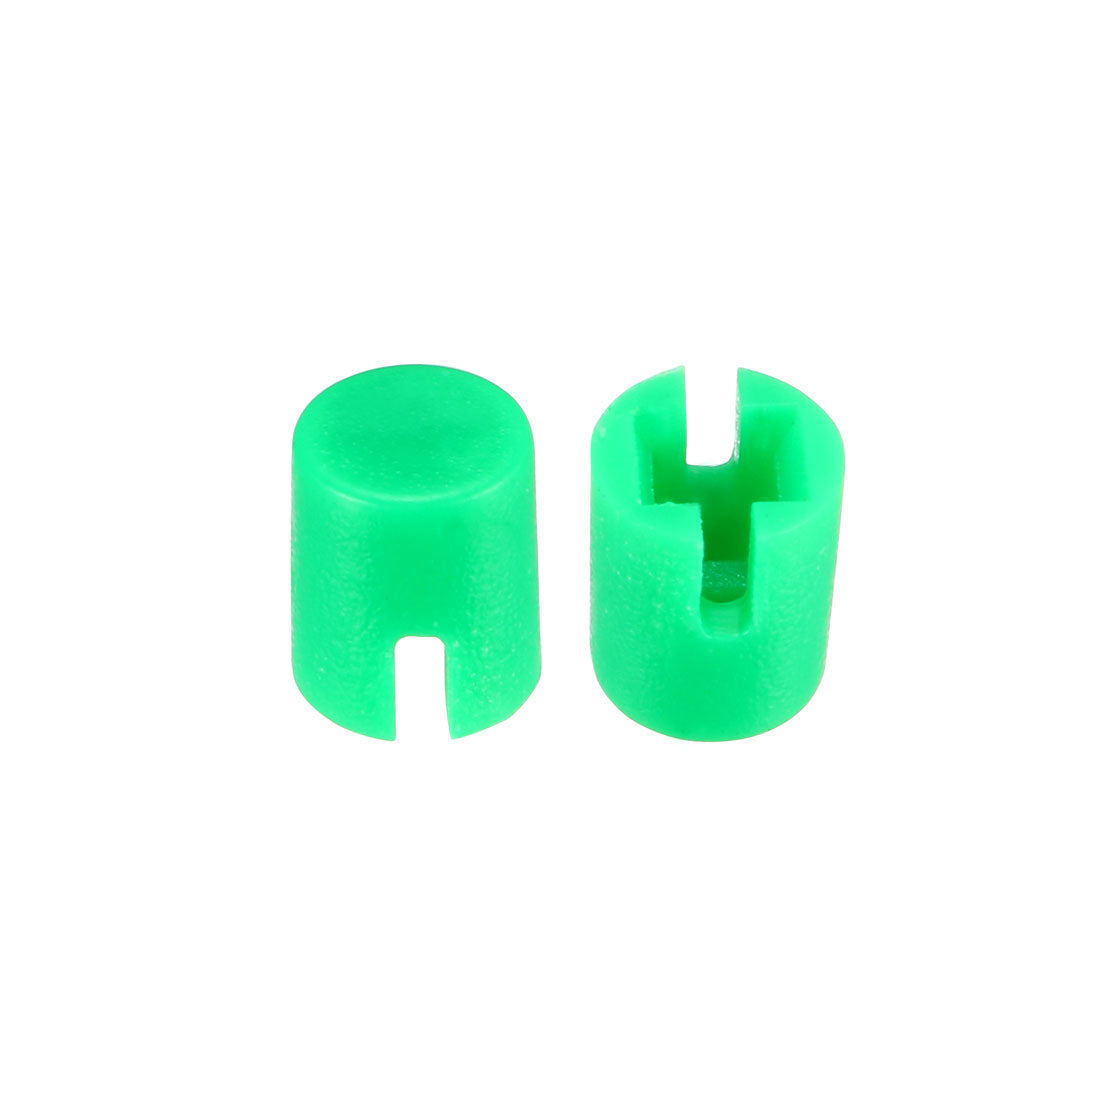 uxcell Uxcell 50Pcs Plastic 4.6x5.5mm Push Button Tactile Switch Caps Cover Keycaps Green for 6x6x7.3mm Tact Switch